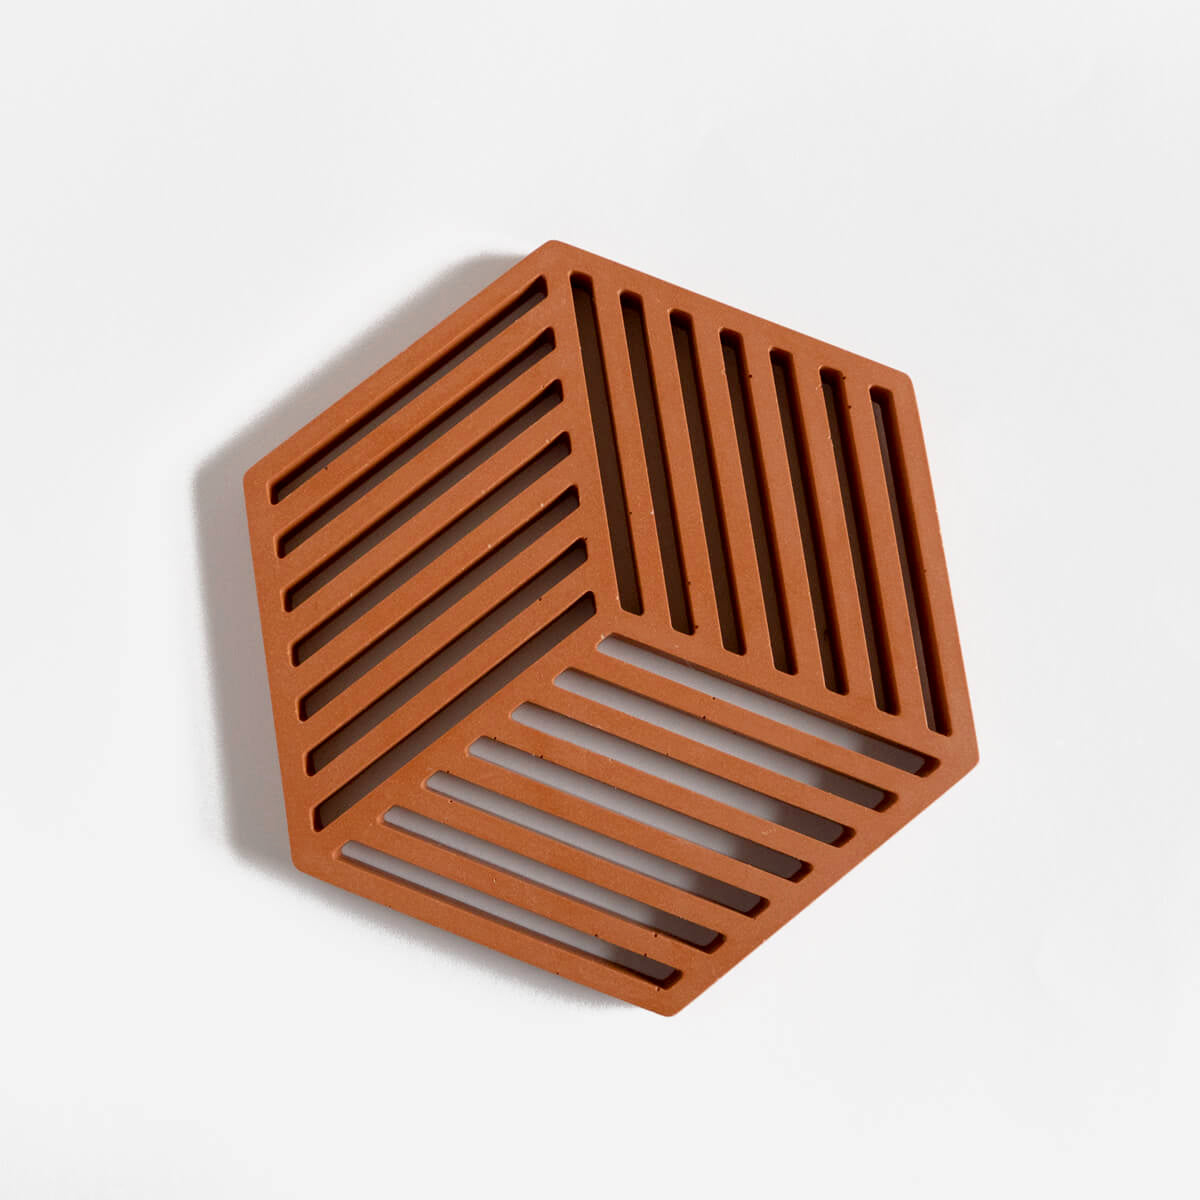 A contemporary hexagonal jesmonite trivet in a warm terracotta hue by Klndra for Curious Makers